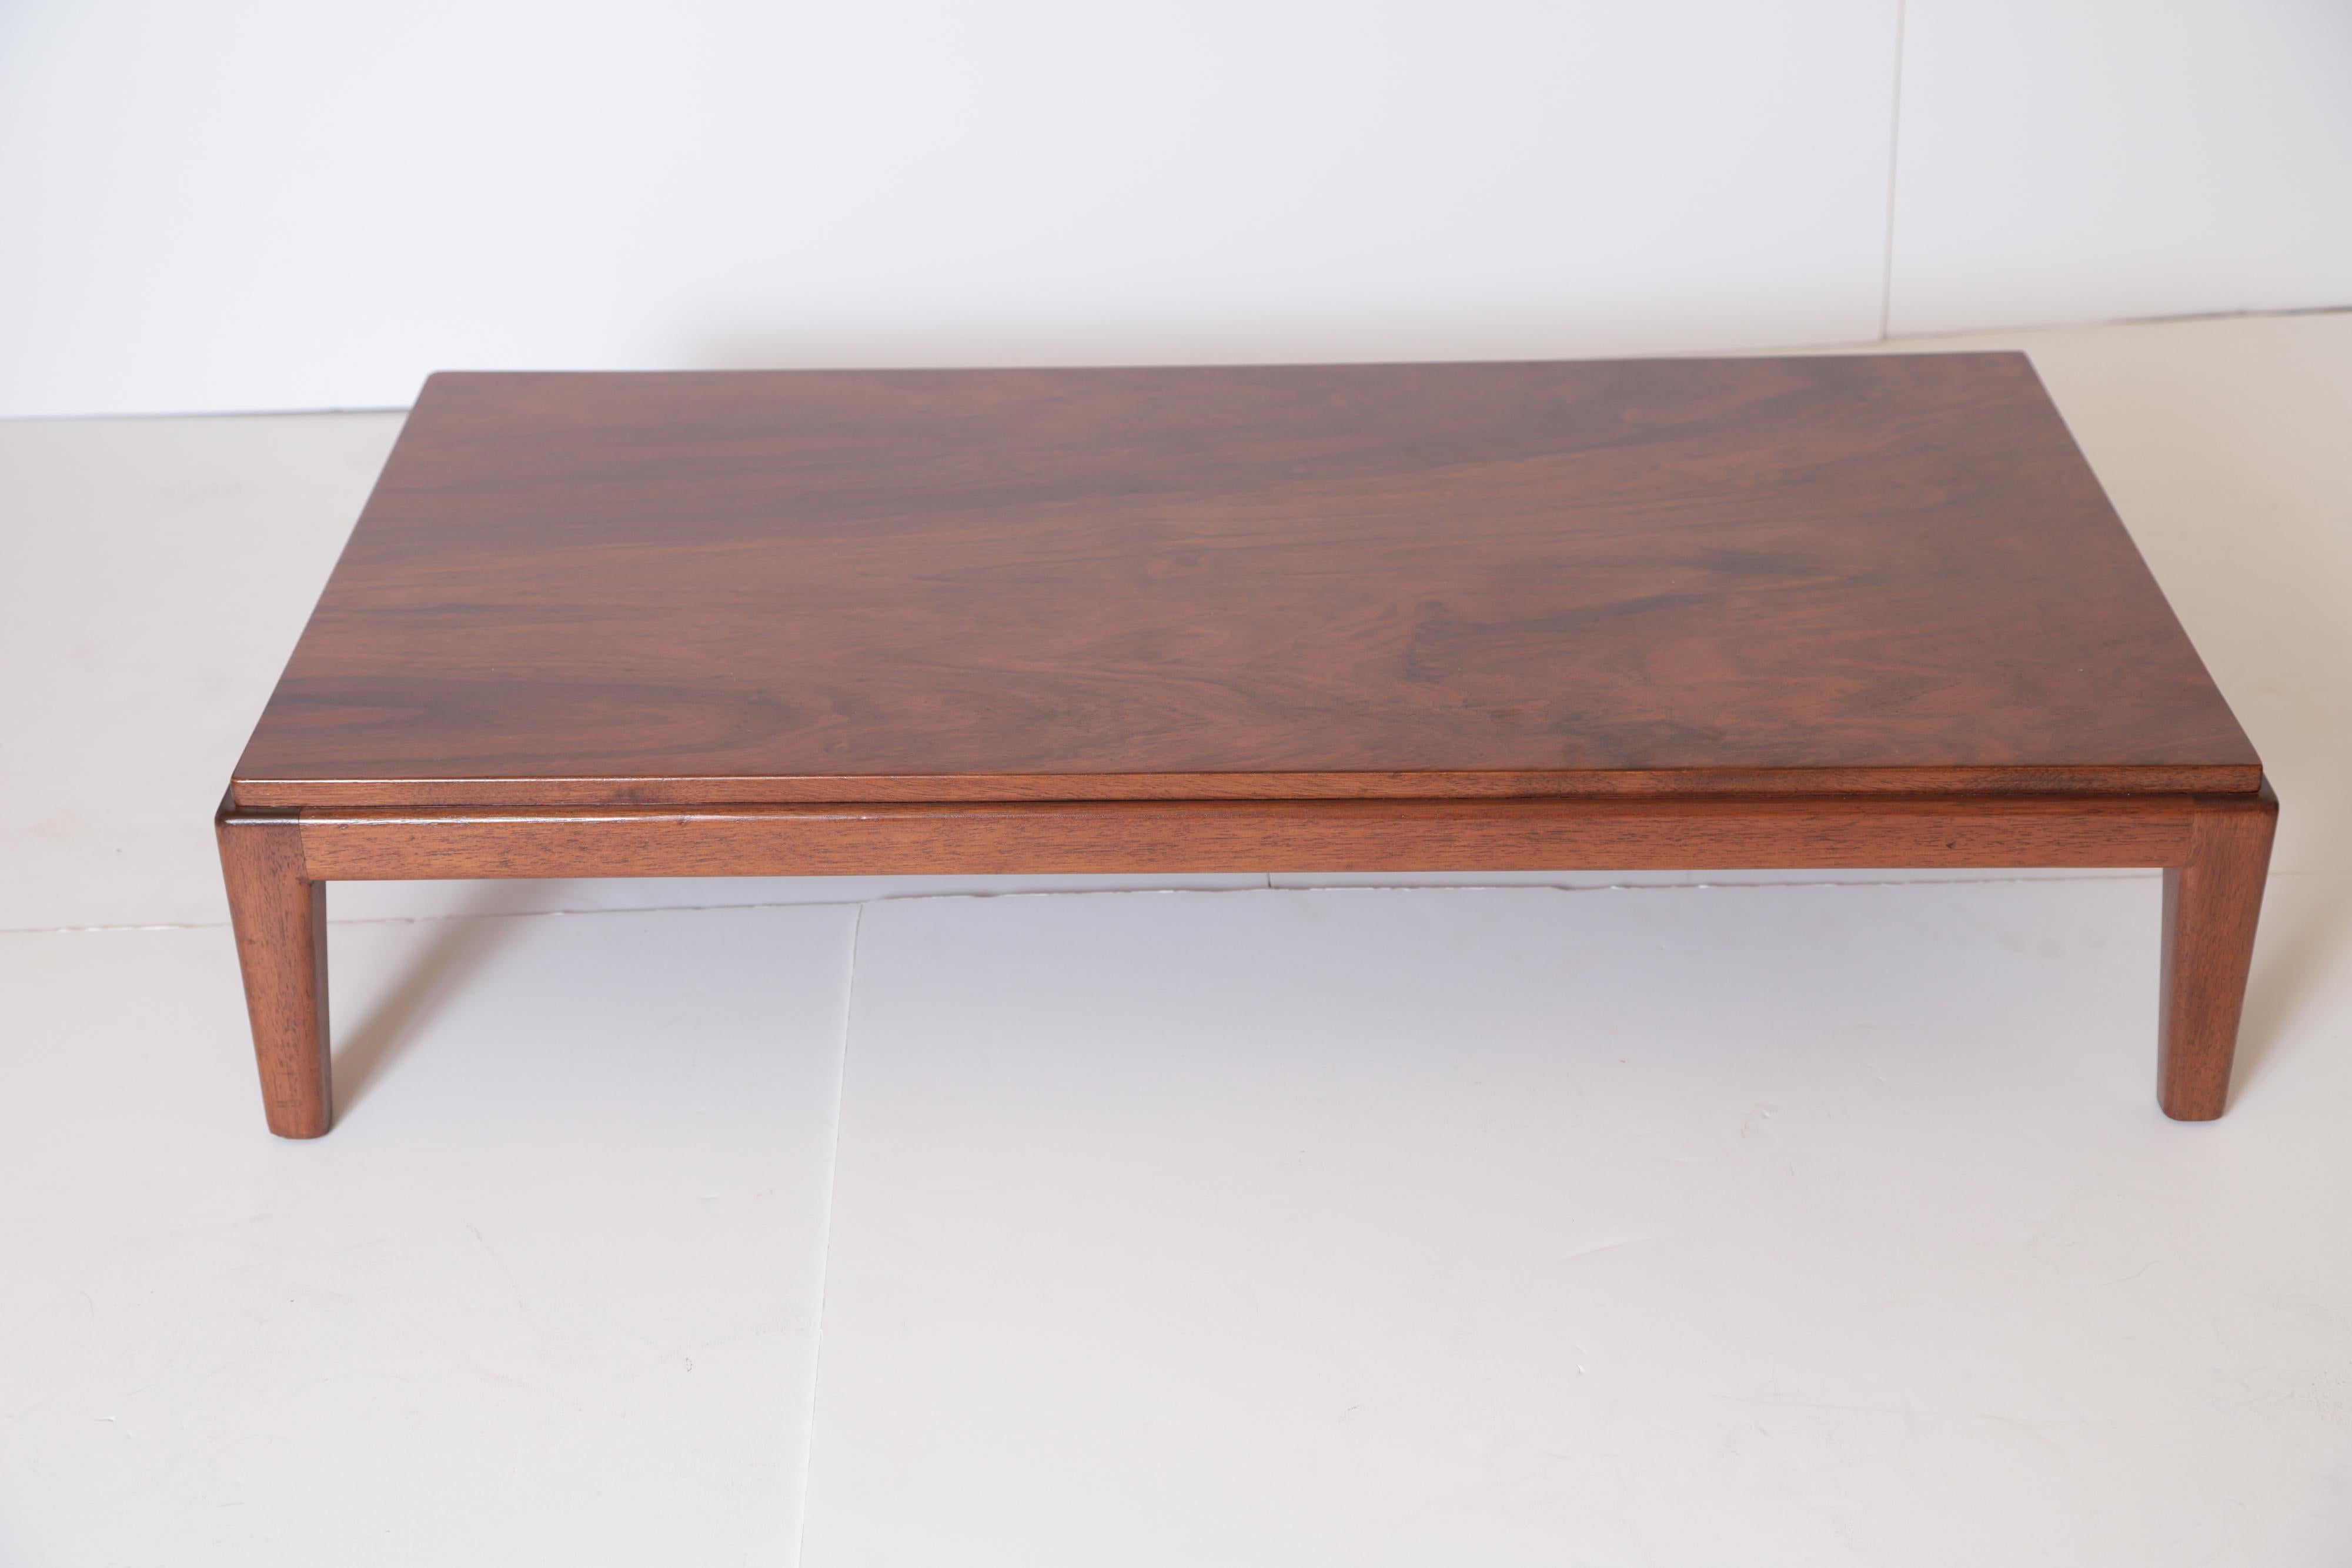 Art Deco Midcentury Low Coffee or Occasional Table by Schmieg & Kotzian For Sale 3